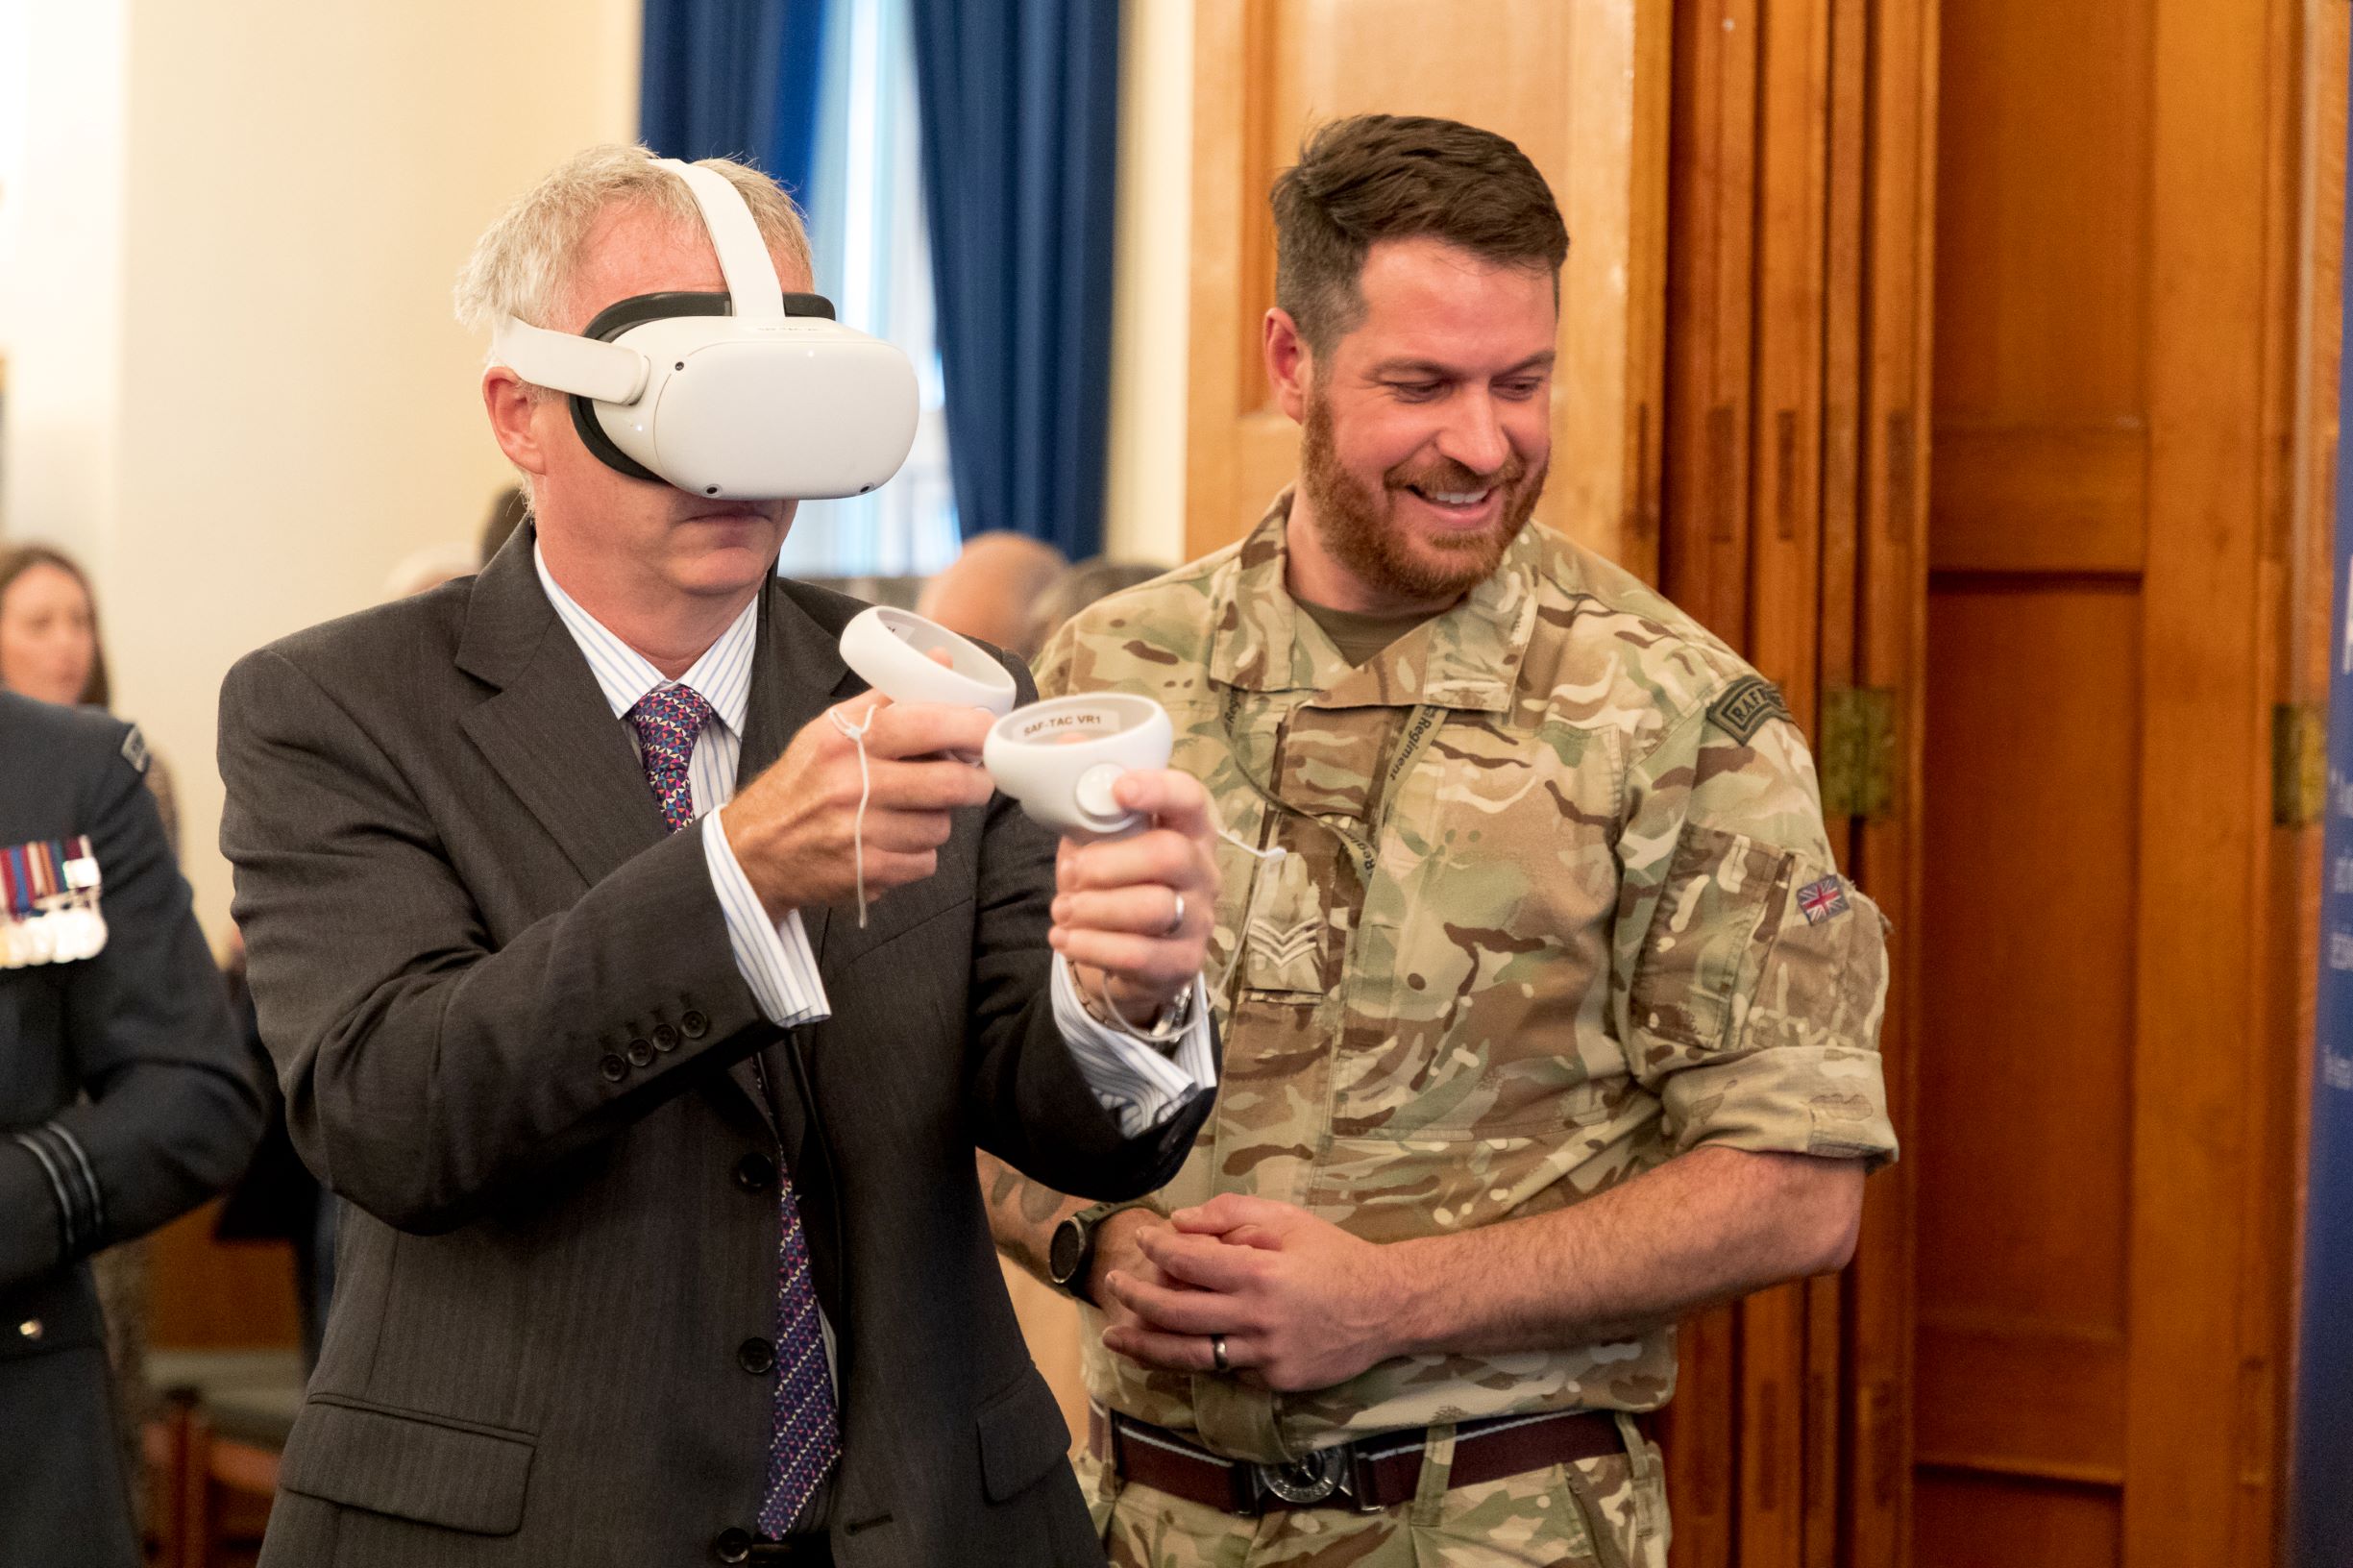 Image shows aviator and guest using Virtual Reality headset.